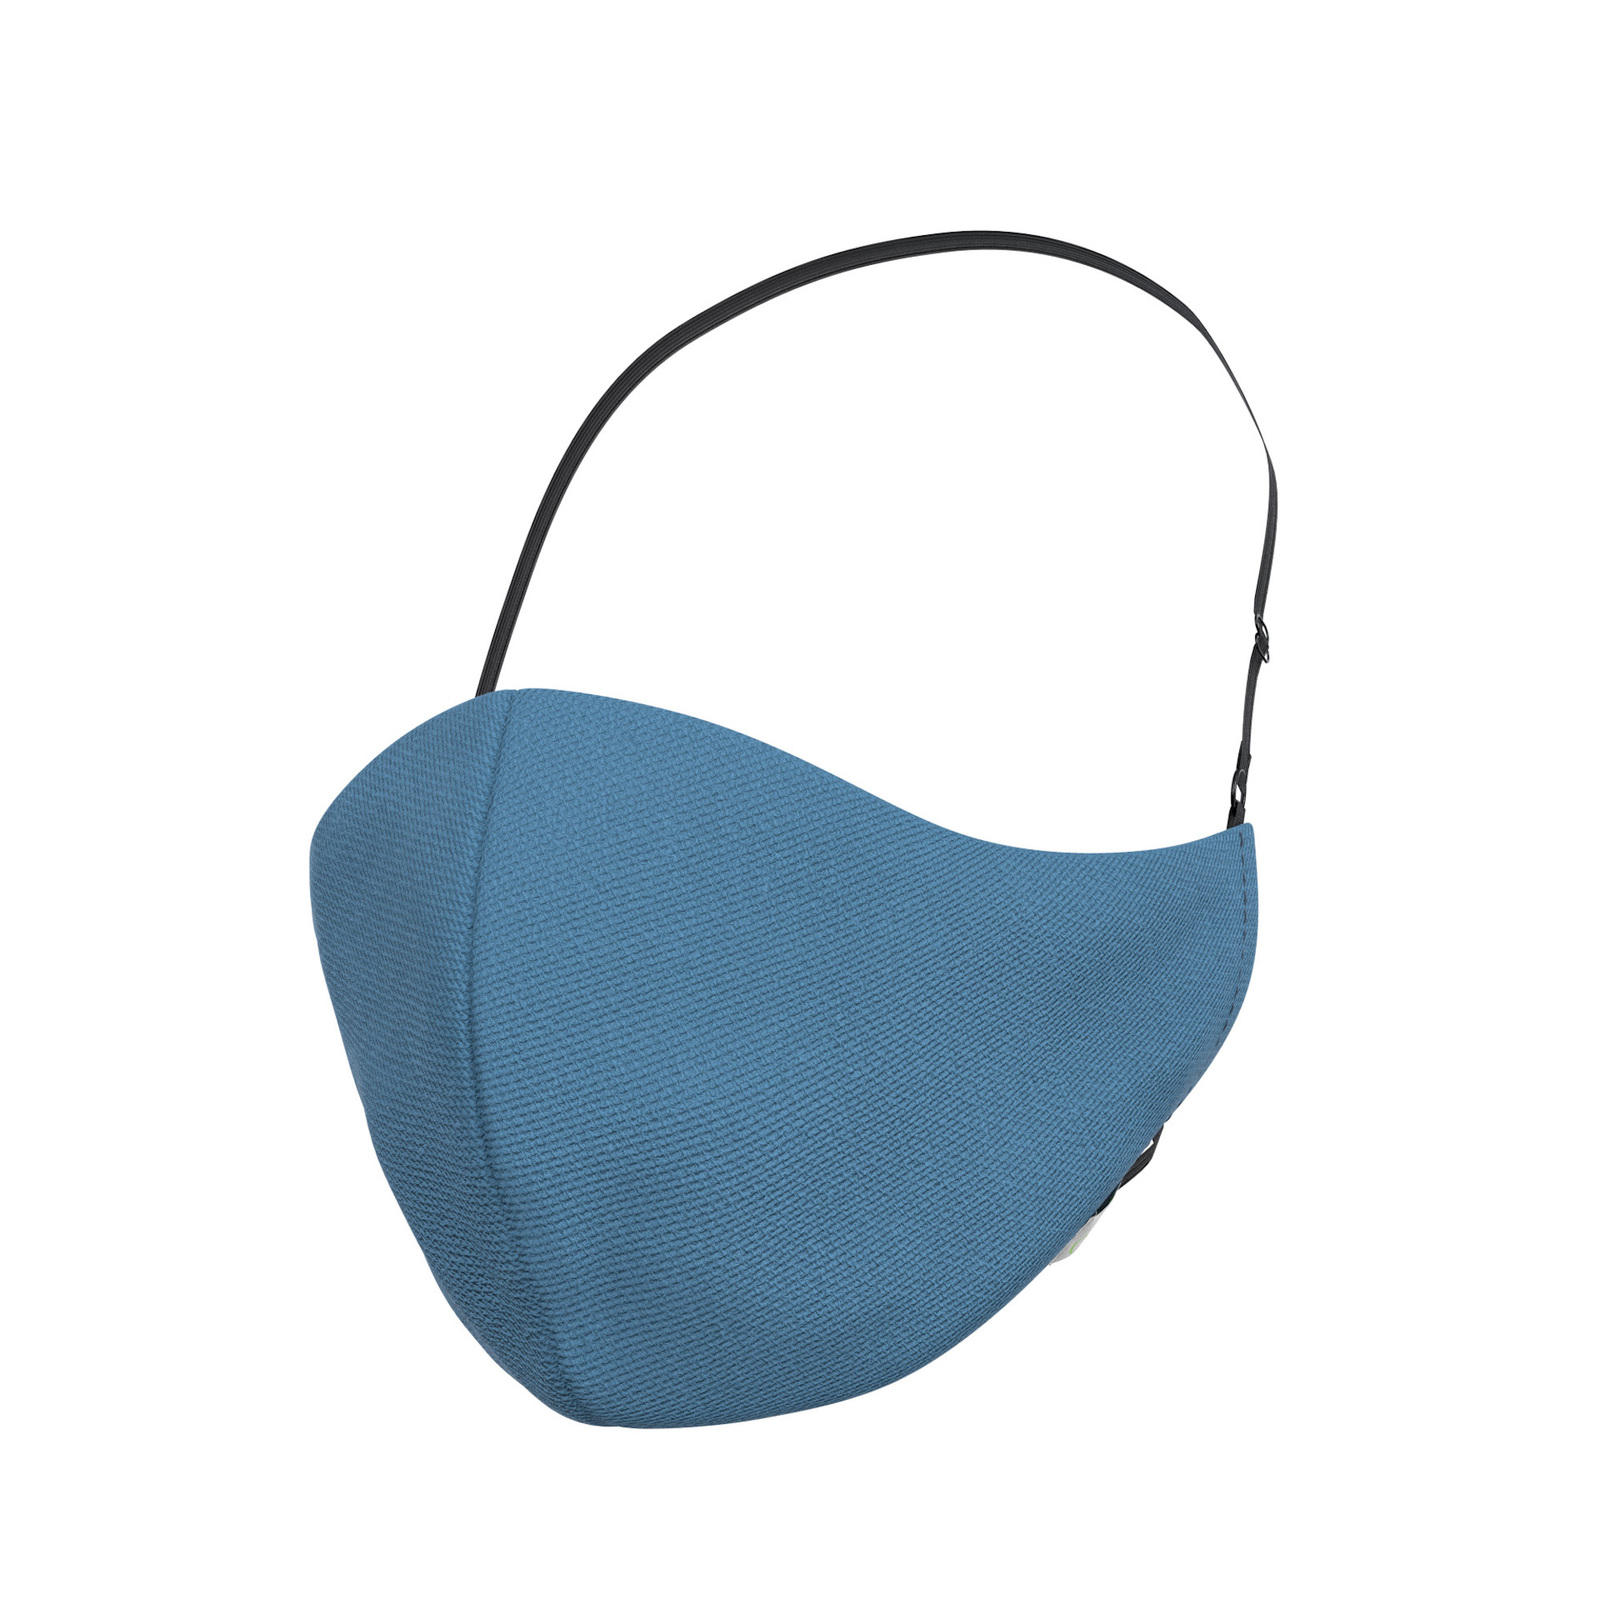 Adjustable Handmade Face Mask | Eco Friendly Organic Fabric Mask with 3 Filters - $9.99